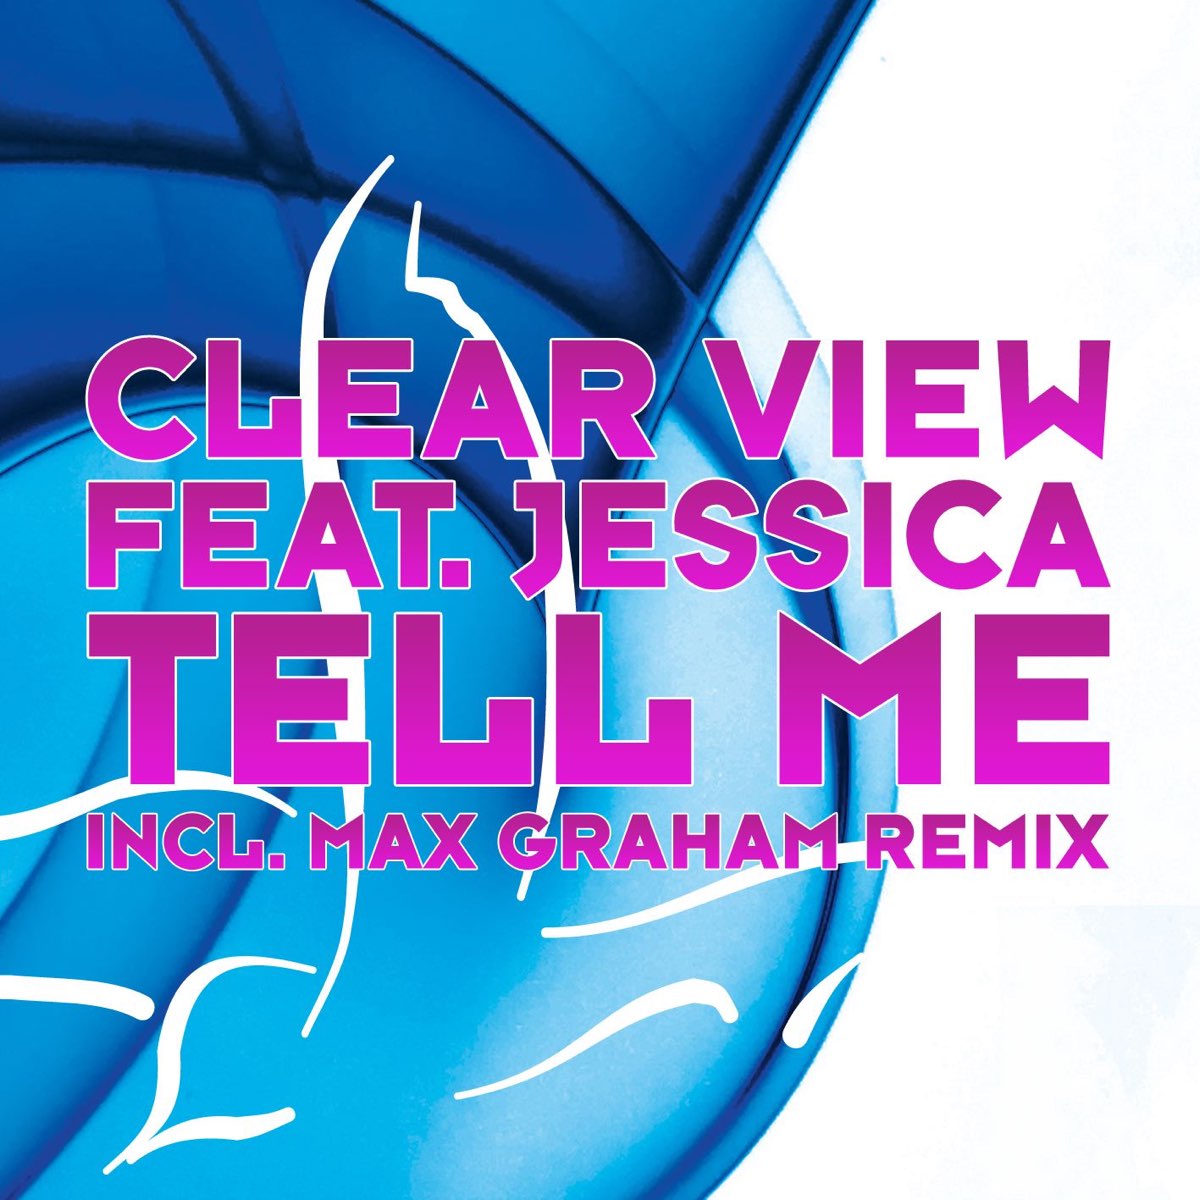 Tell me. Музыка tell me. Markus Schulz & Max Graham feat. Jessica Riddle облжка. Cleared Remix. Feat jess